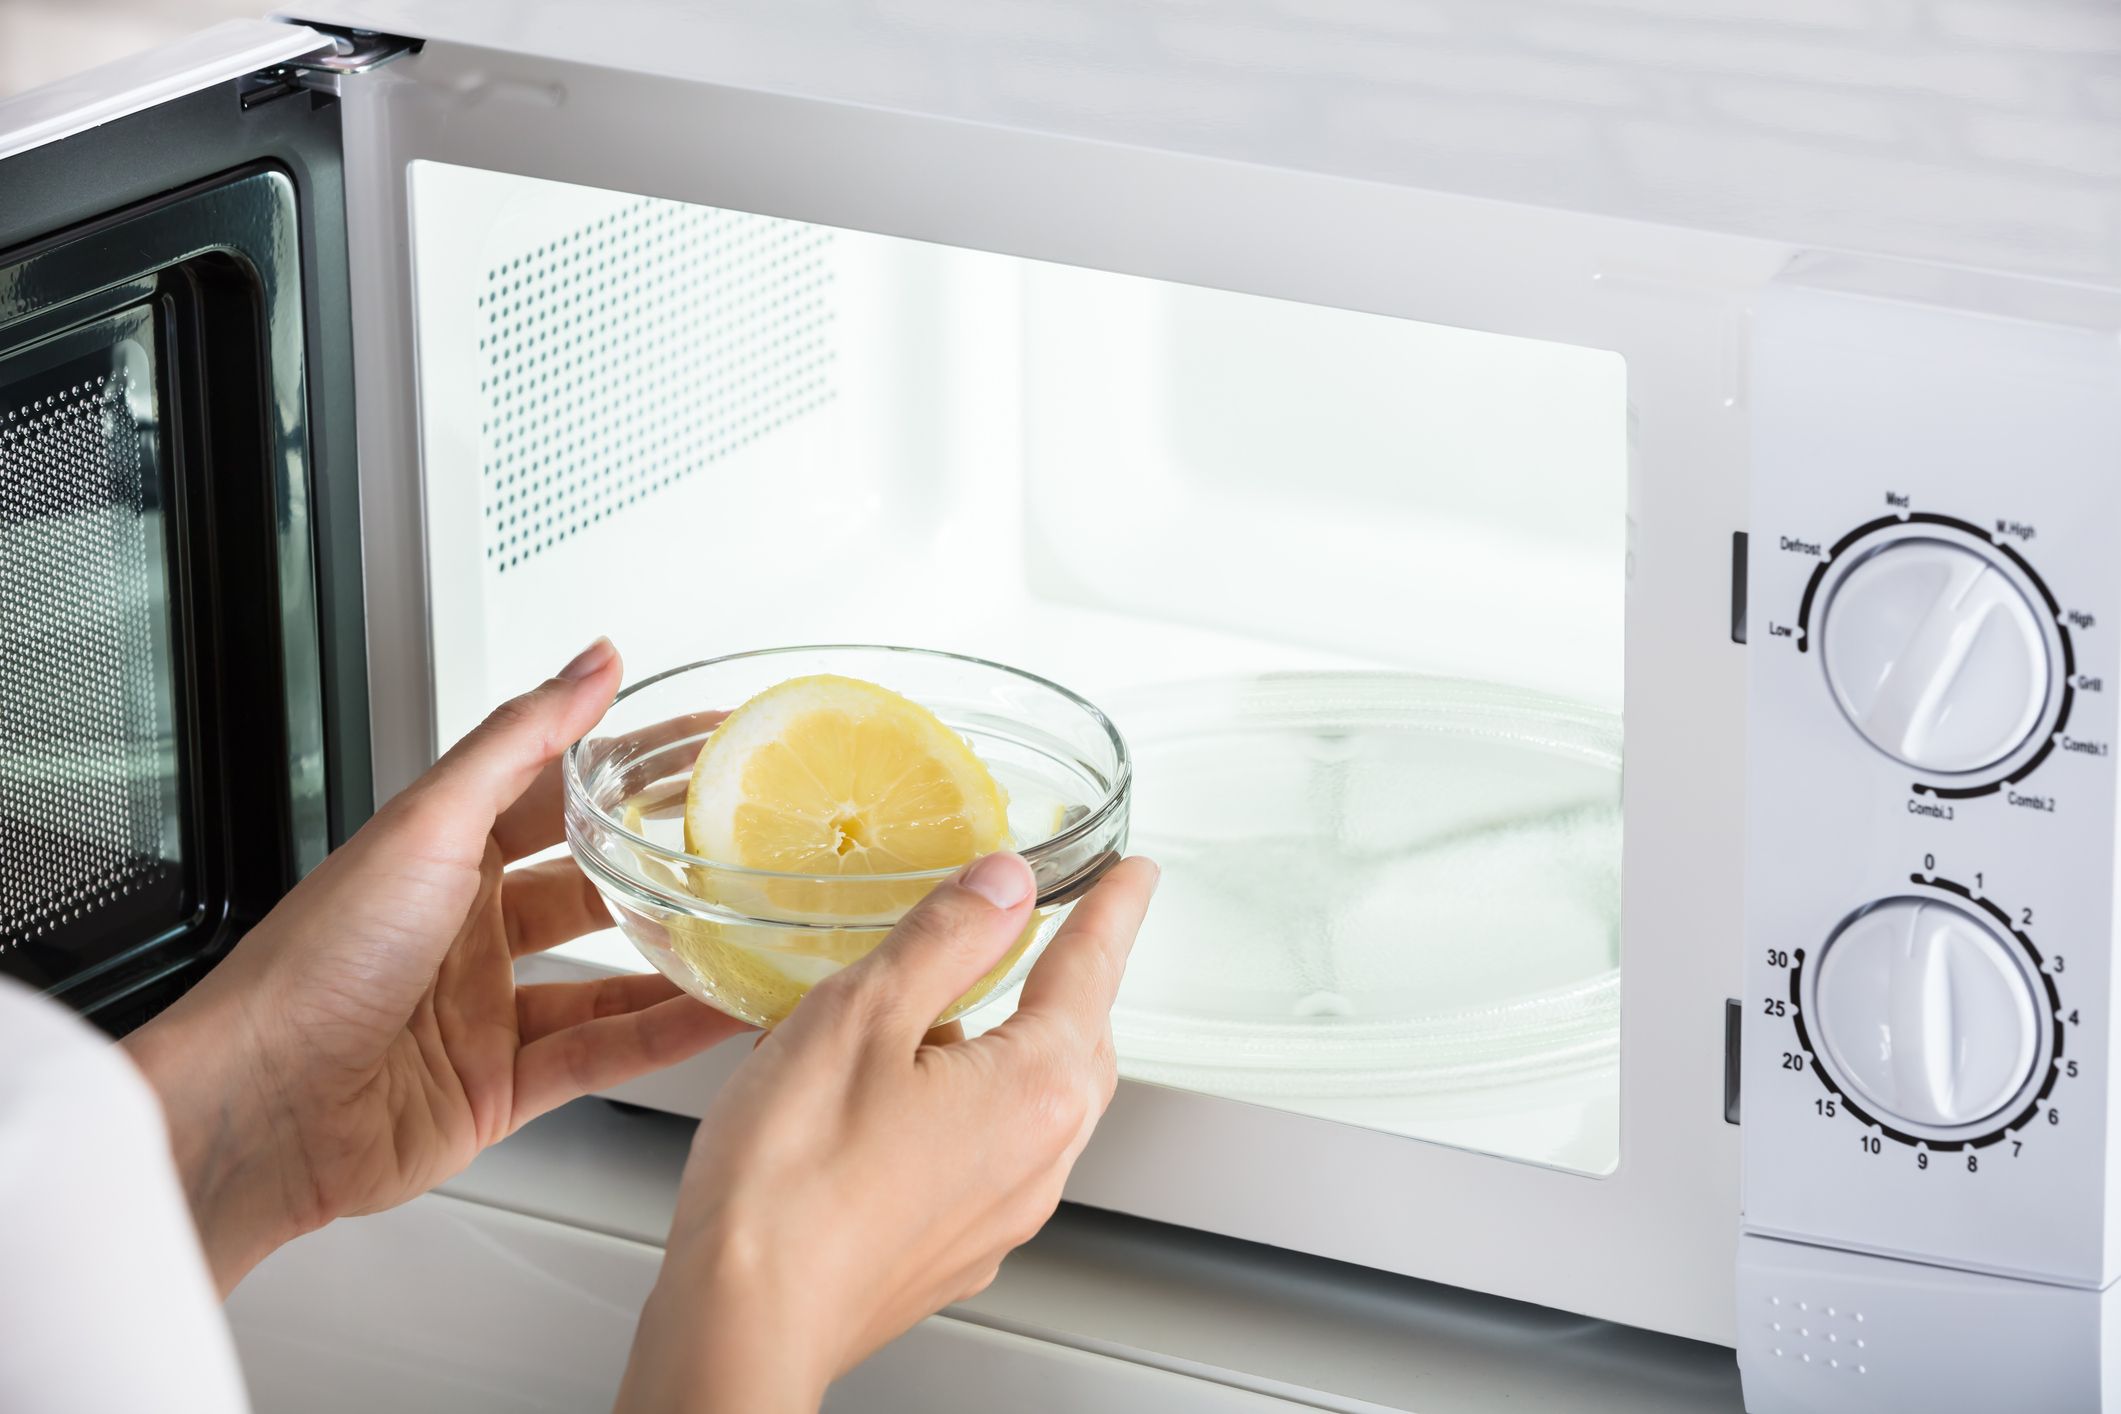 https://hips.hearstapps.com/hmg-prod/images/how-to-clean-a-microwave-646532310085b.jpg